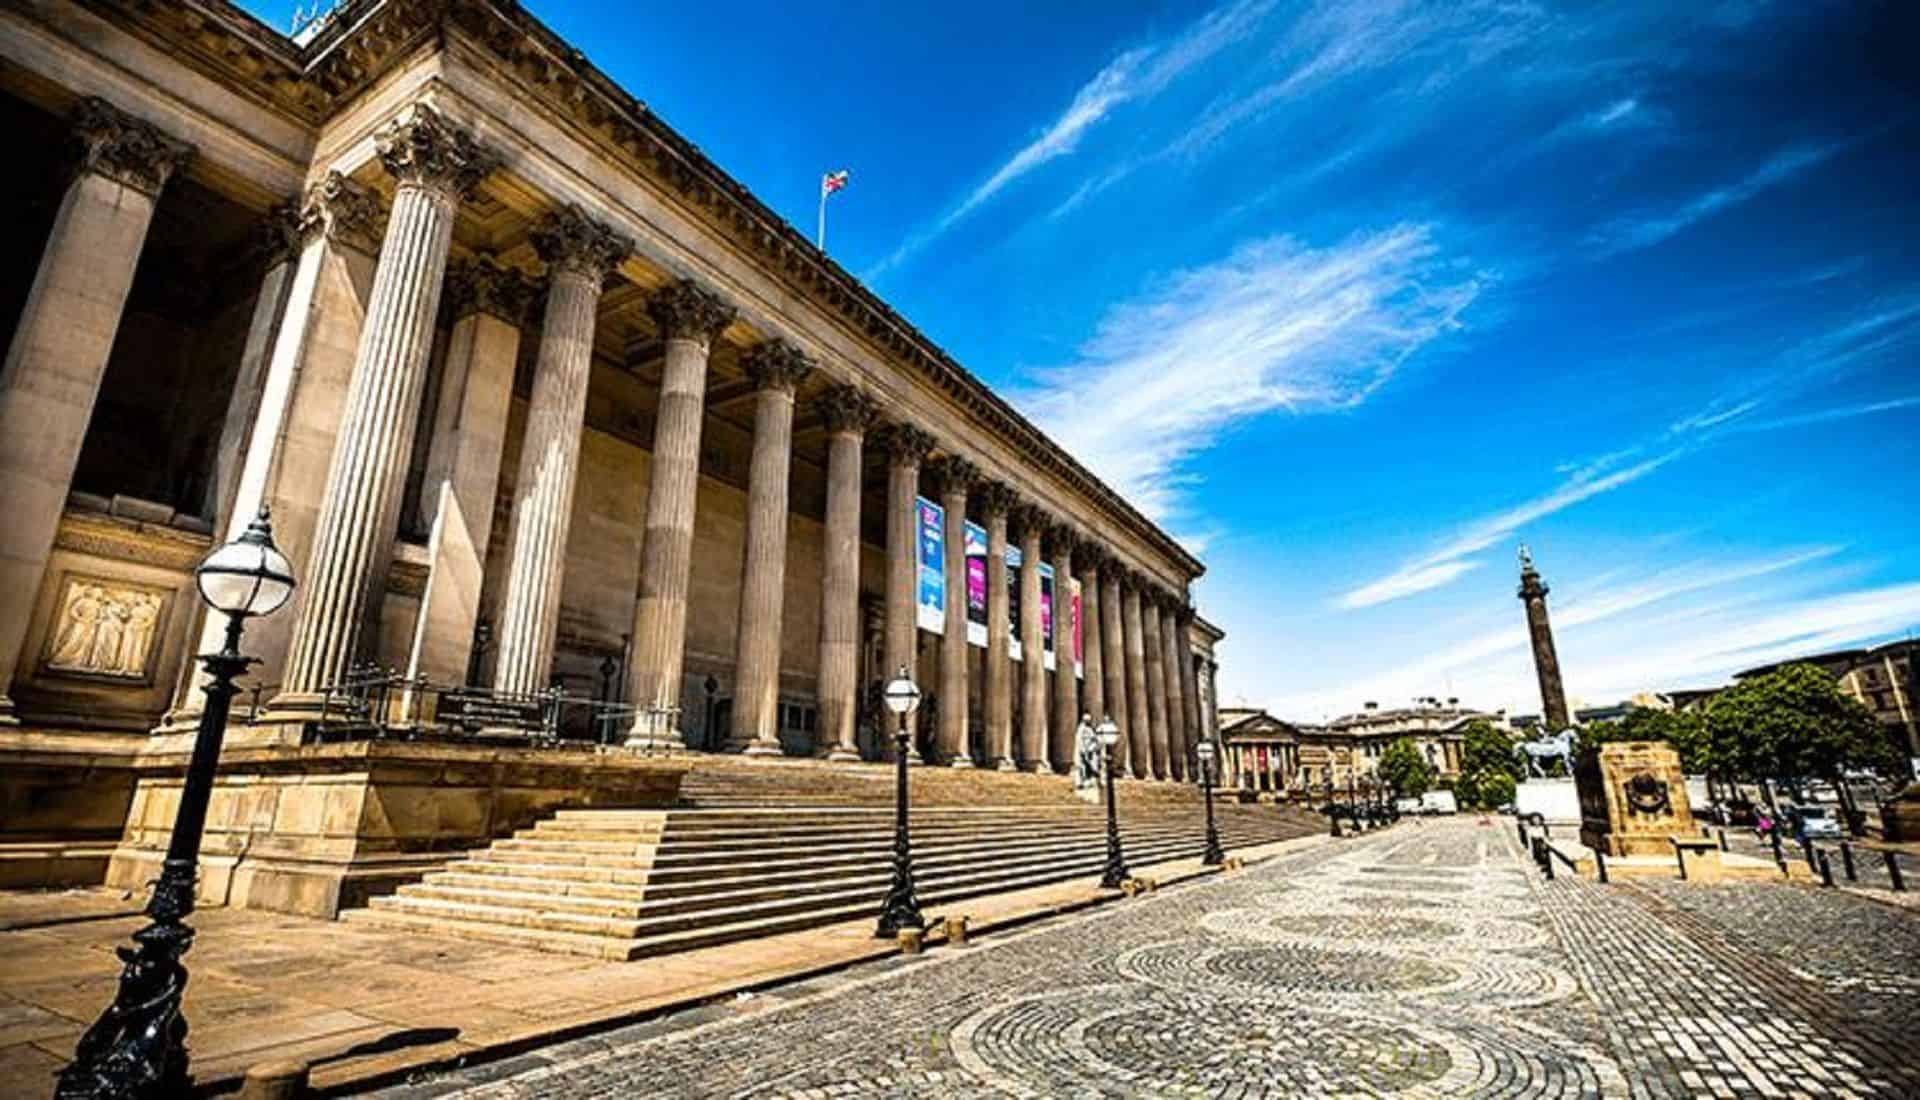 St George's Hall Liverpool in UK